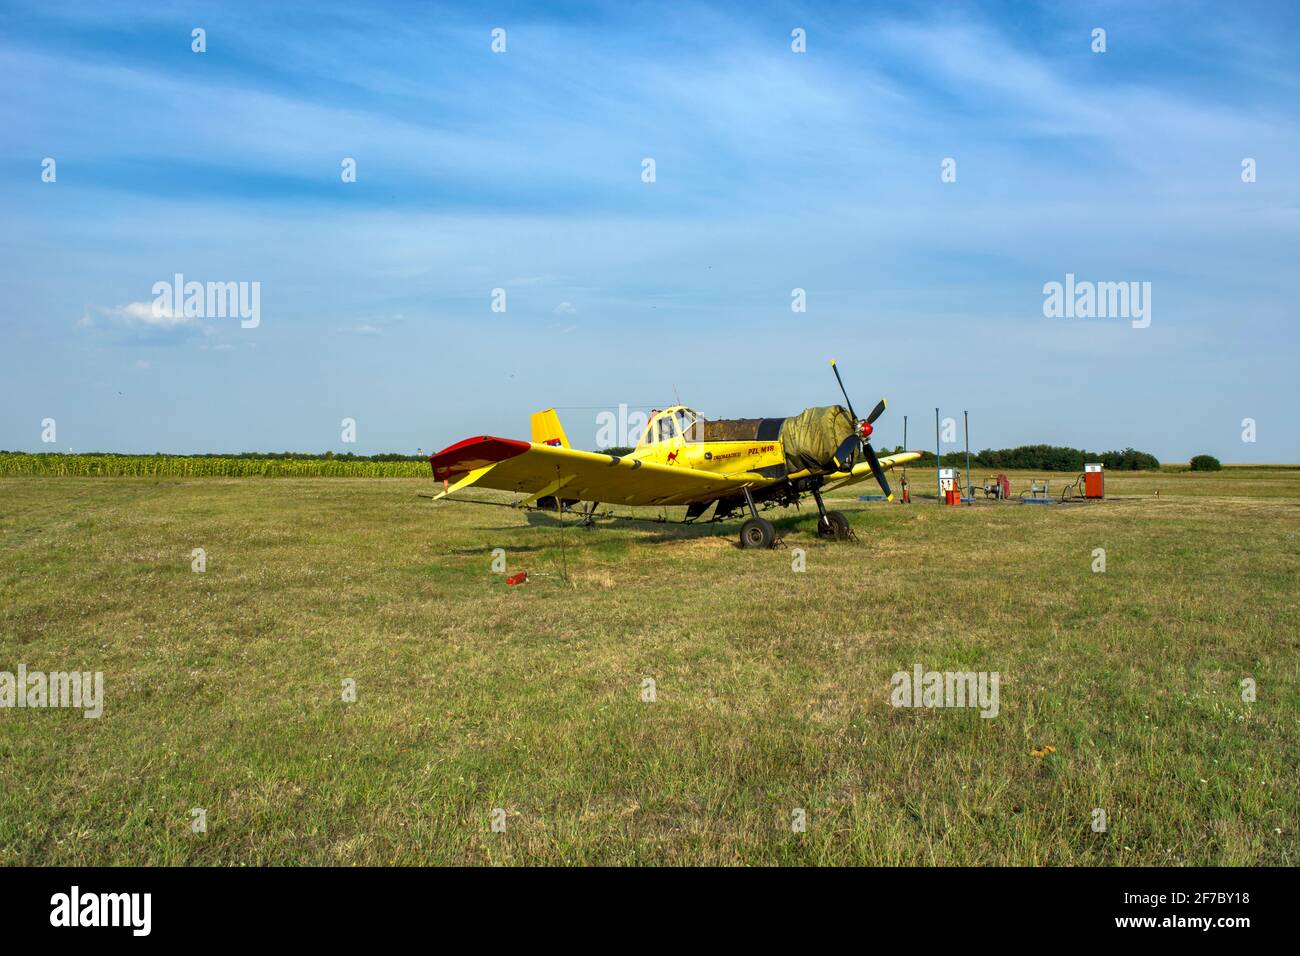 Zrenjanin, Ecka, Serbia, August 04,2015.Old airport and an old plane that occasionally flies for tourist, school or agricultural needs. Stock Photo